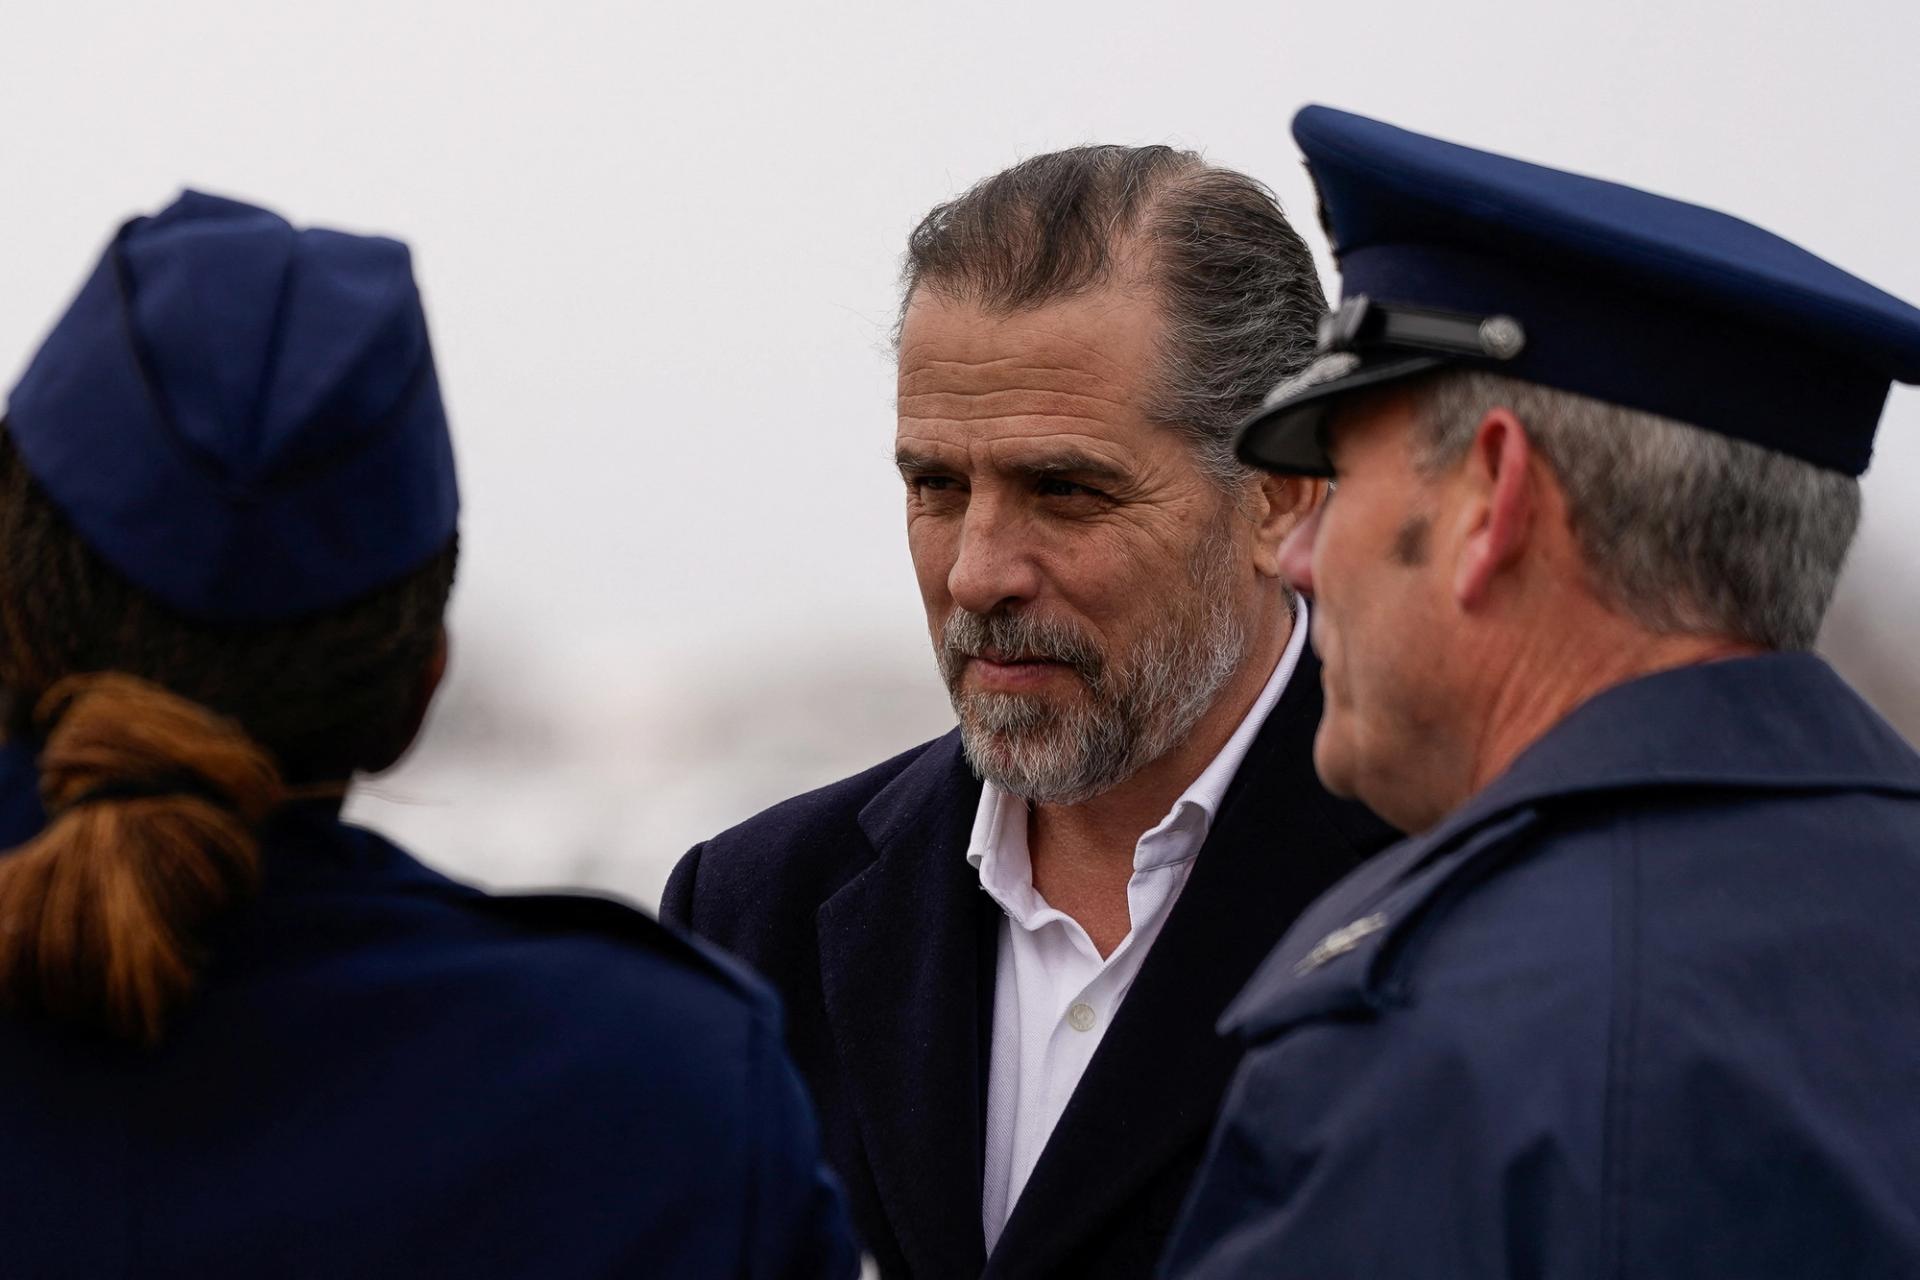 Hunter Biden arrives at at Hancock Field Air National Guard Base after disembarking from Air Force One with his father.